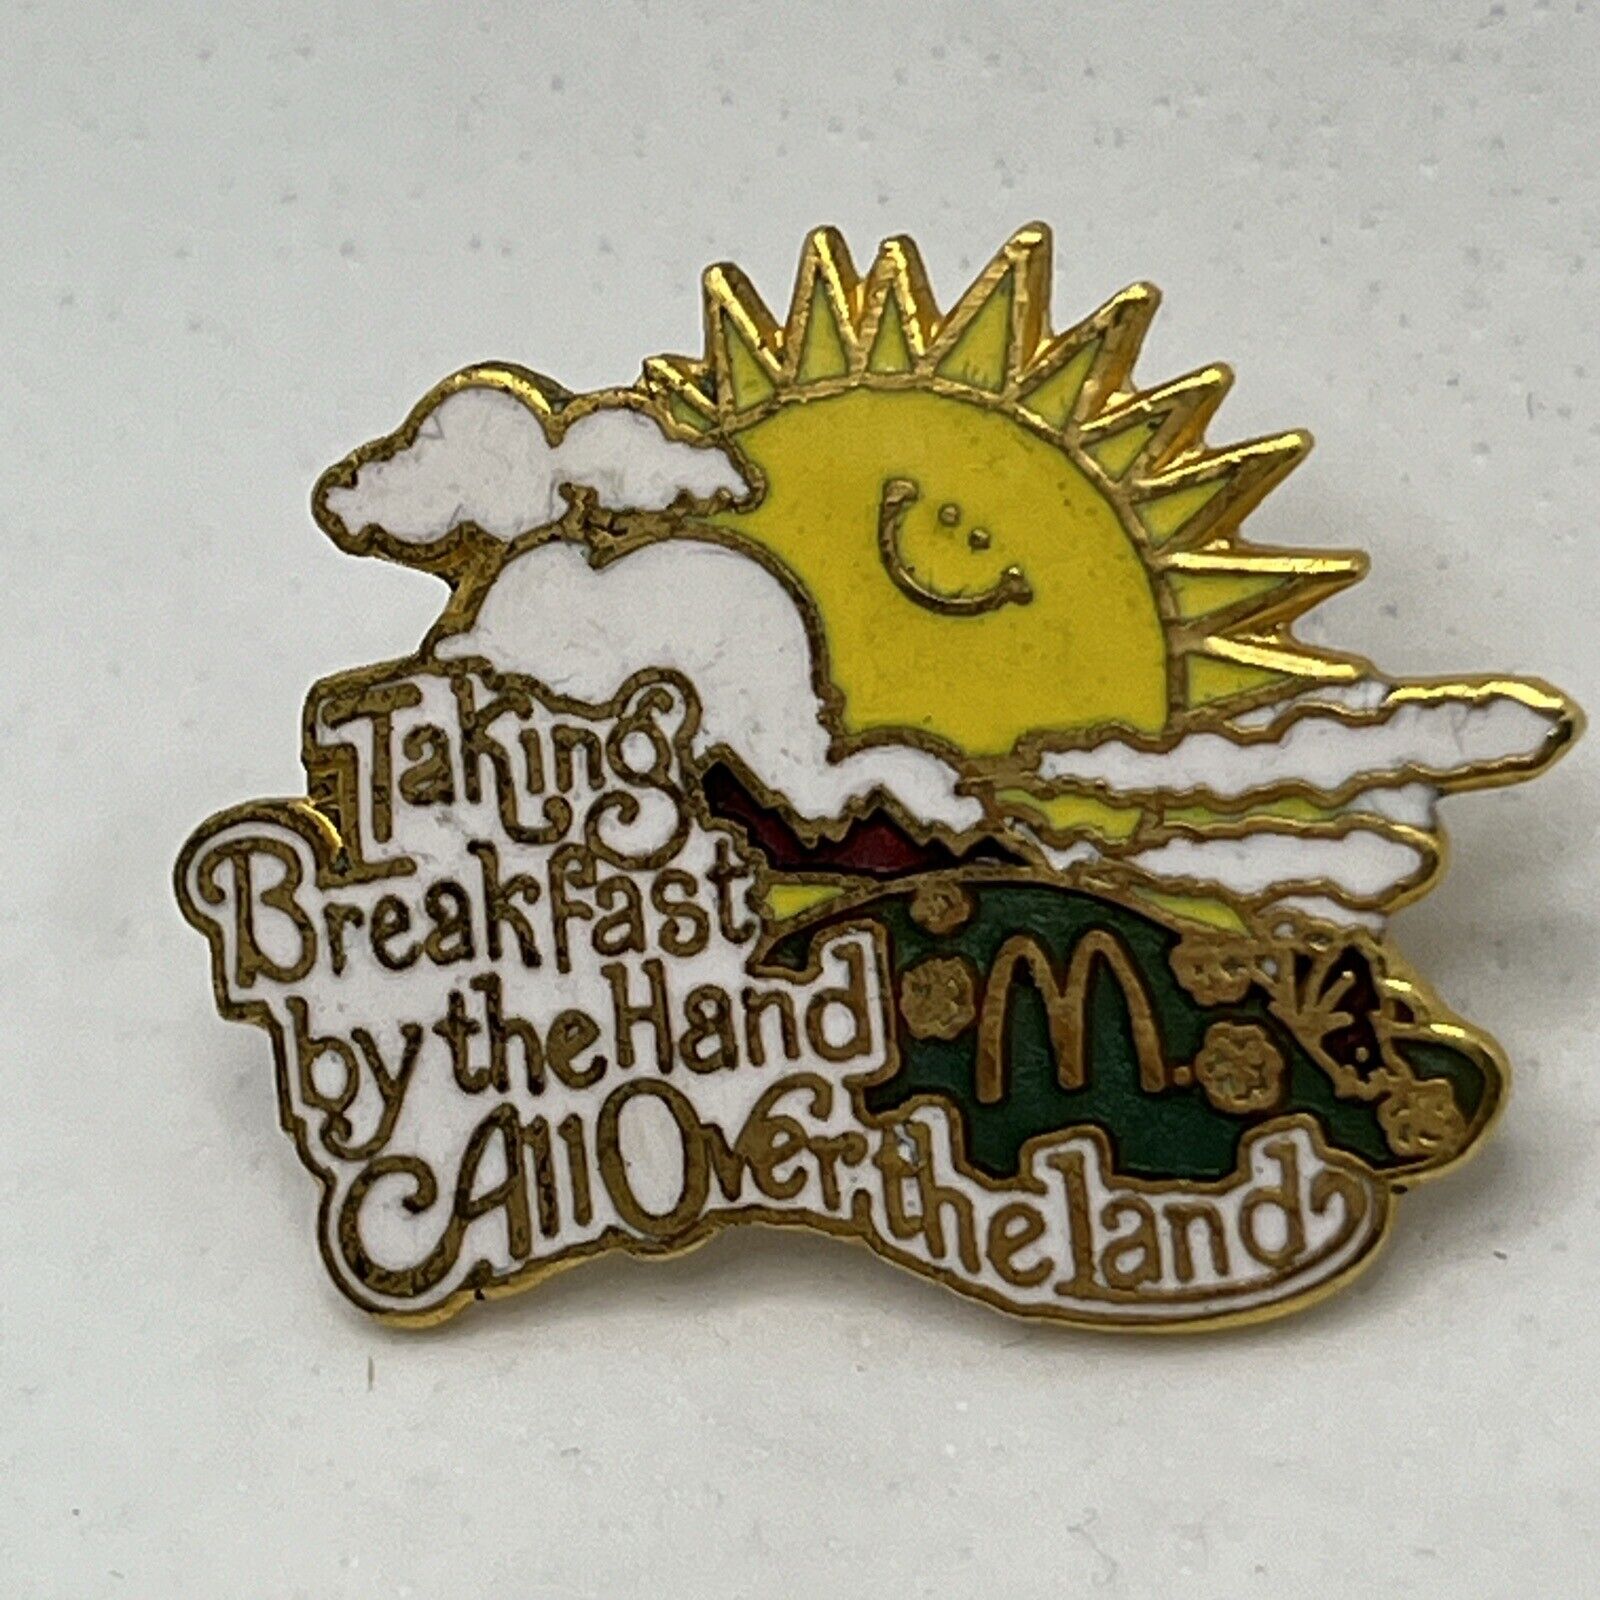 McDonald’s Taking Breakfast By The Hand All Over The Land Enamel Lapel Hat Pin